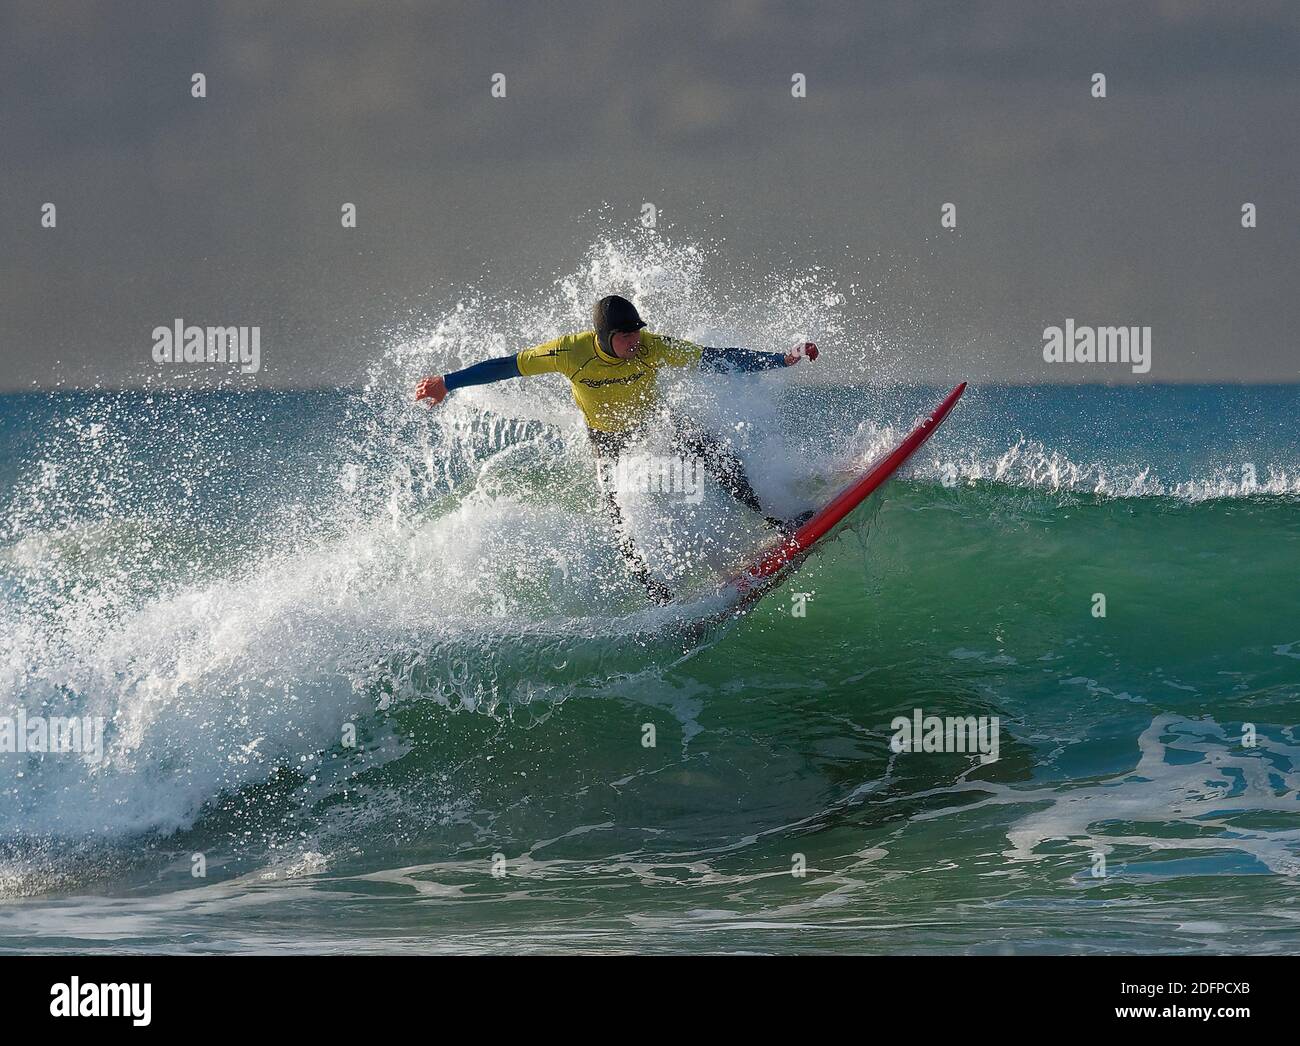 Newquay,Cornwall, 6th December 2020. UK weather, The Jet stream moves to give warm sunshine at the Lightning Bolt Single Fin shoot out surfing competition at Little Fistral beach, Collectors and enthusiasts brought vintage classic single fin Gerry Lopez surfboards to surf in Cornwall. Credit: Robert Taylor/Alamy Live News” Stock Photo